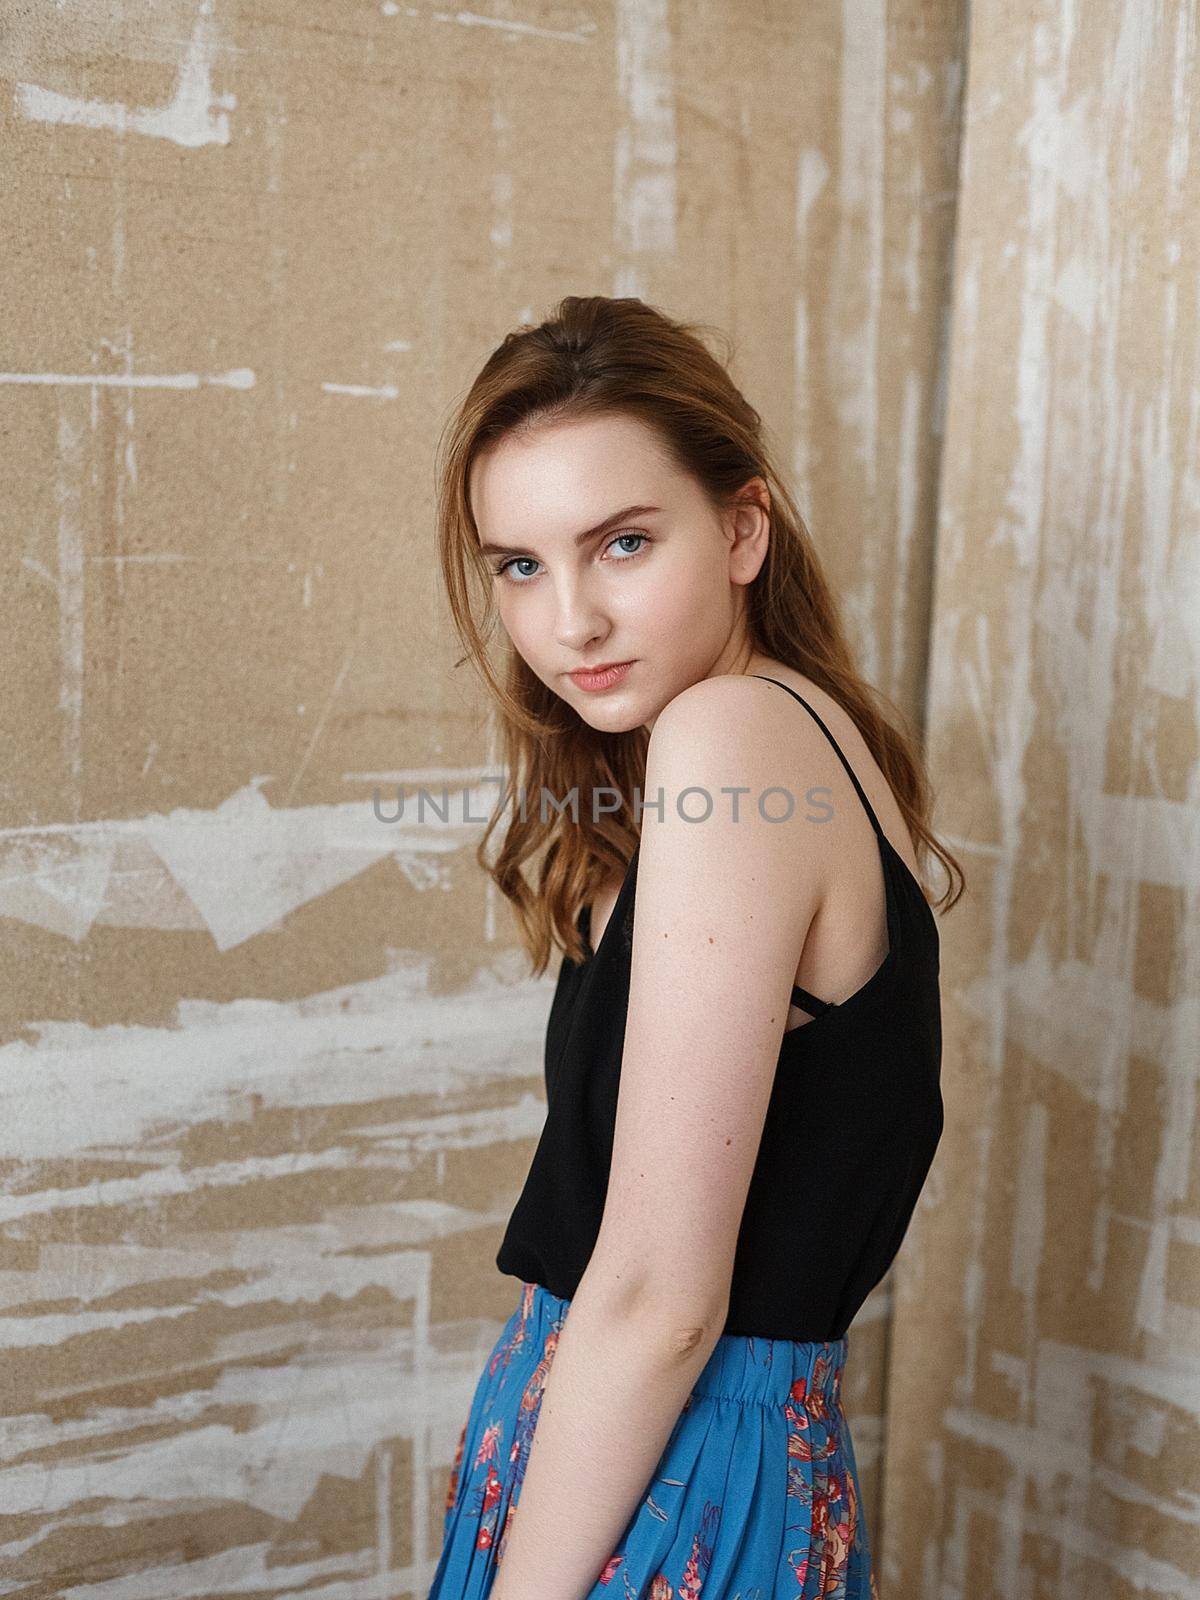 Beautiful young woman in black top, blue skirt, indoors portrait of cute thoughtful model. caucasian skinny female with long brown hair on abstract background. natural pretty lady posing at studio